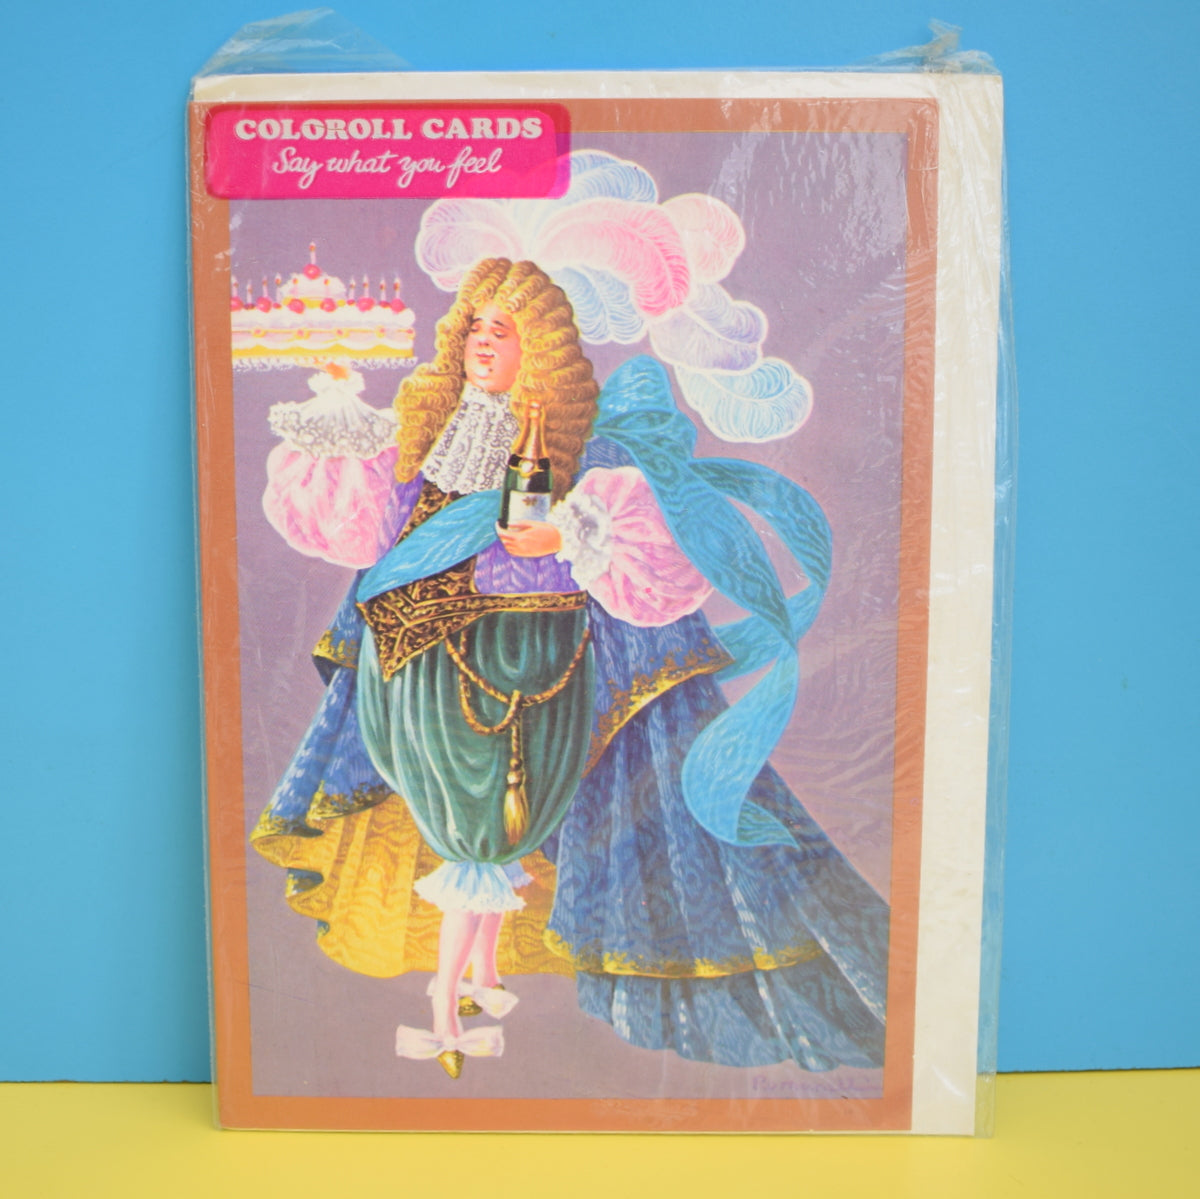 Vintage 1970s Greeting Card - by Paolo Romanelli - The Birthday Cake - Kitsch